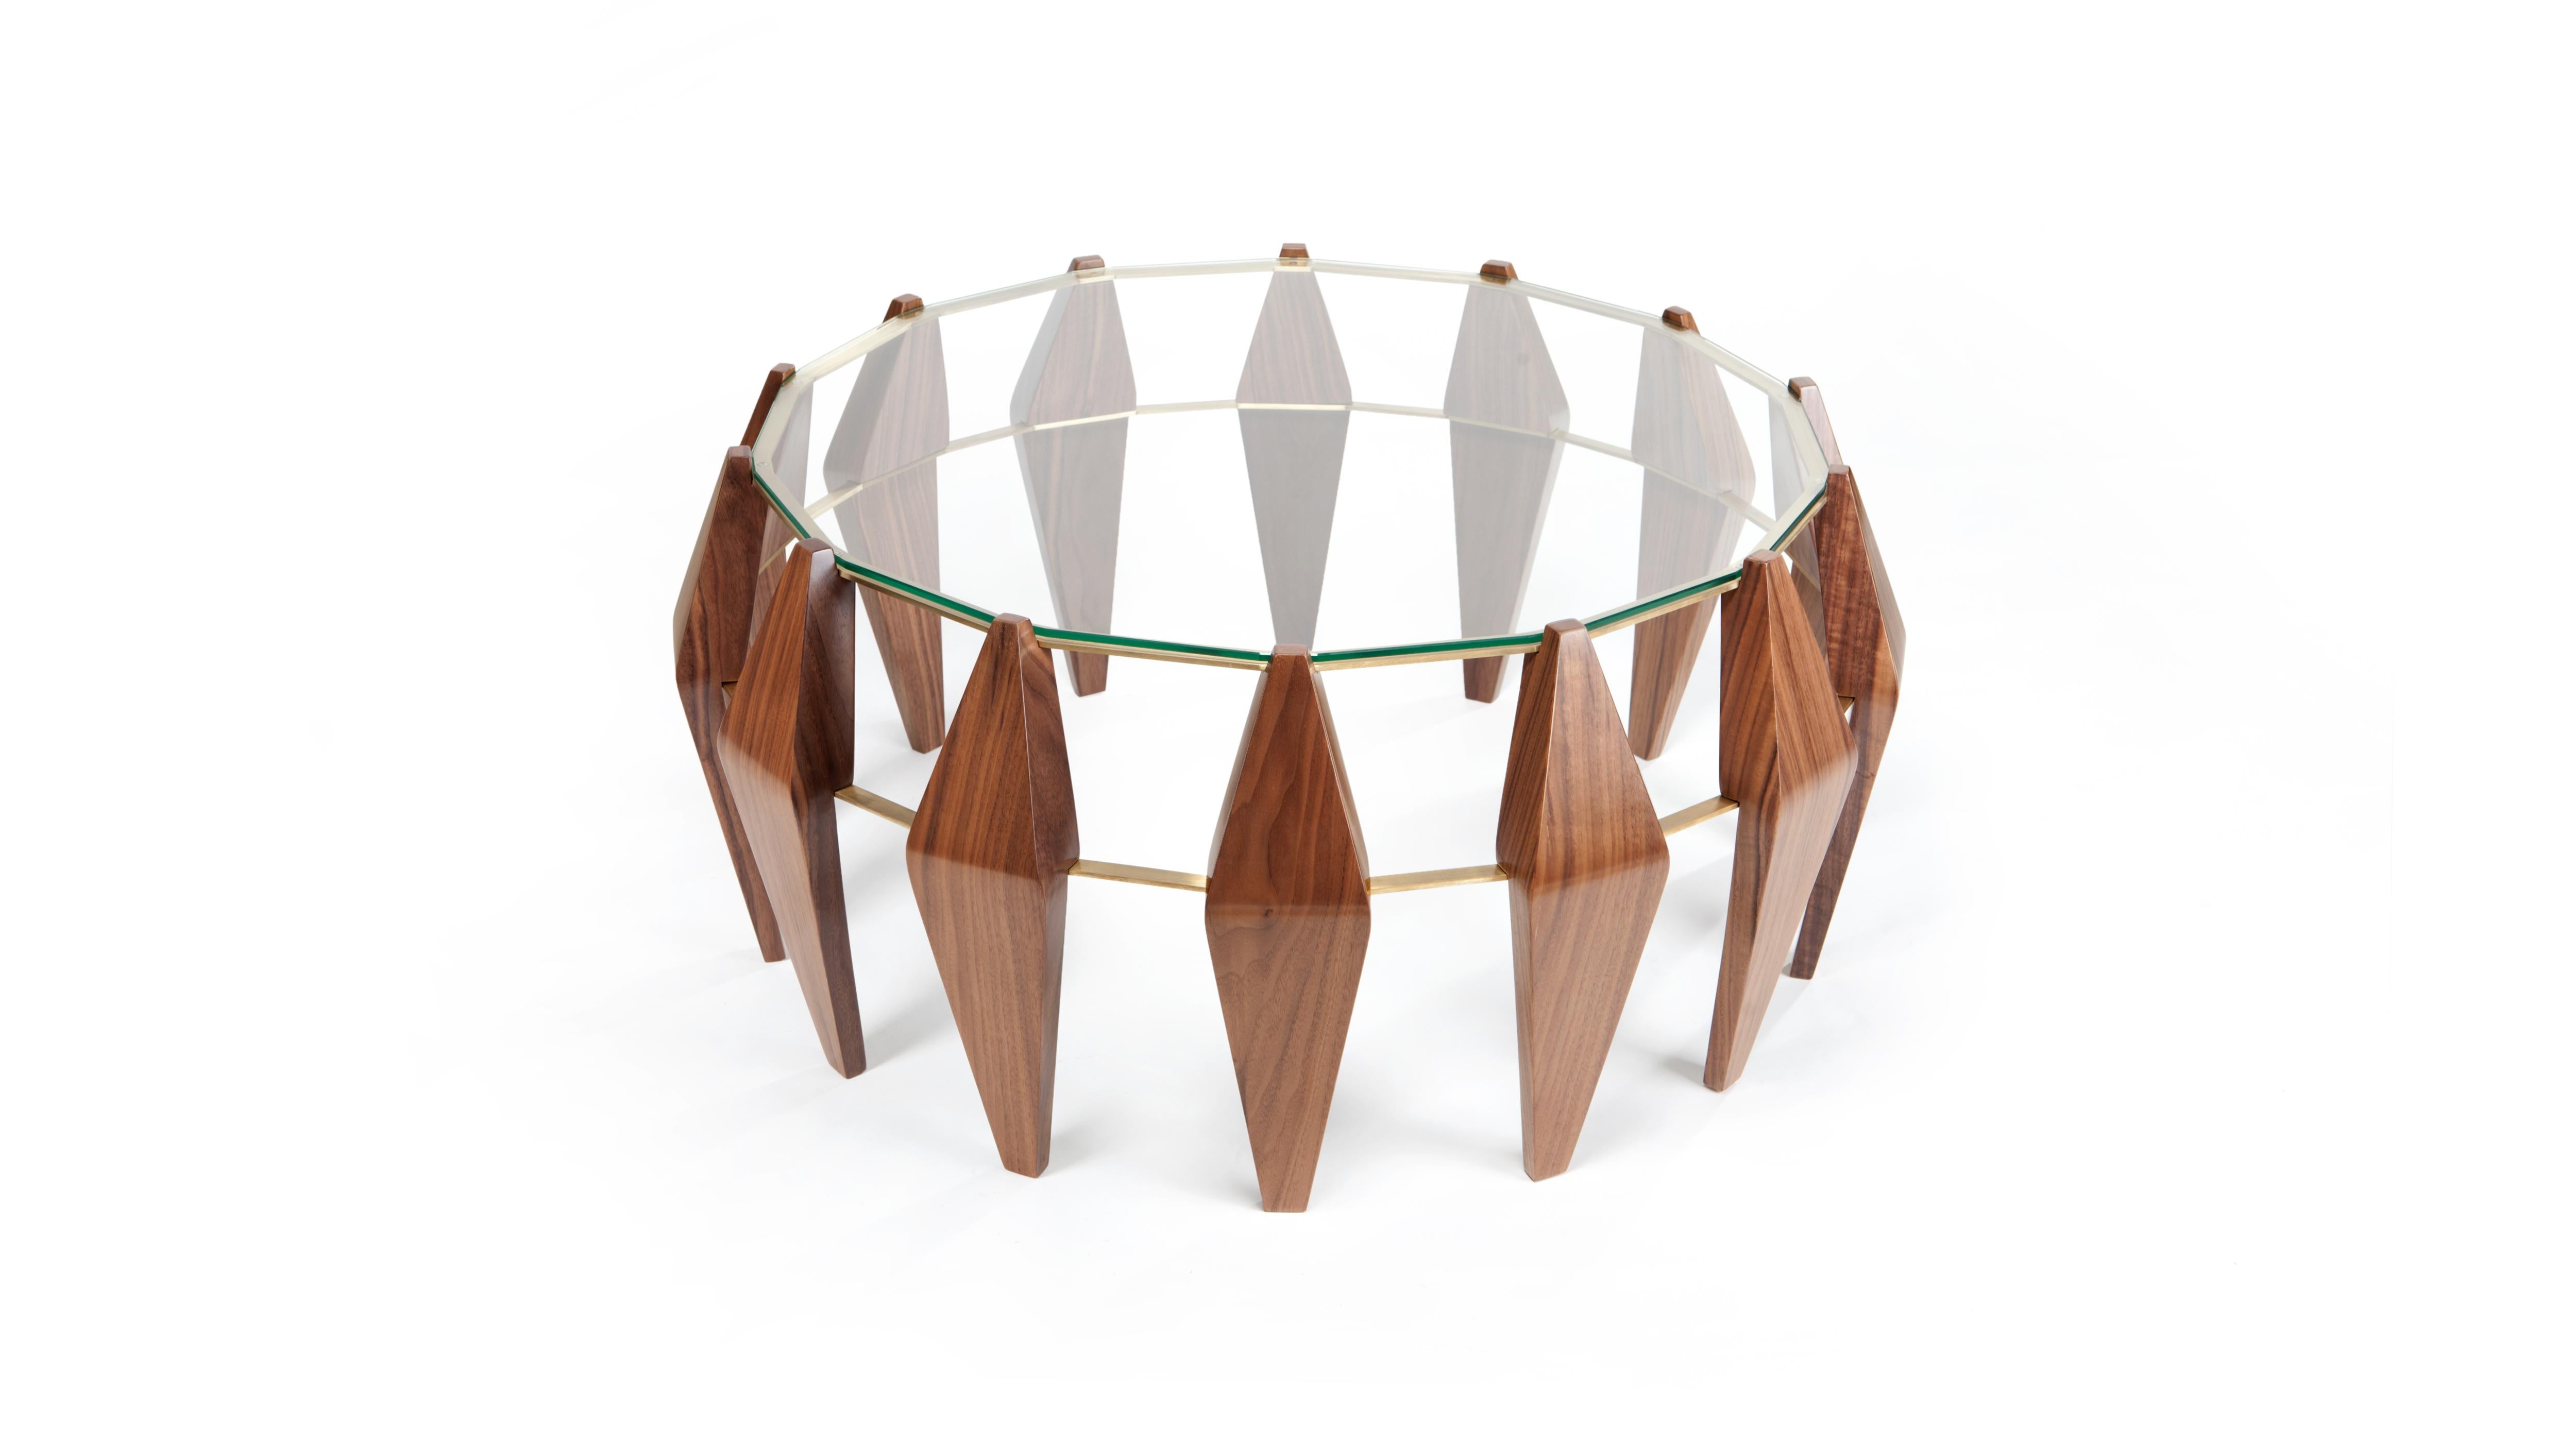 Low Na Pali Walnut Coffee Table by InsidherLand
Dimensions: D 90 x W 90 x H 40 cm.
Materials: wood structure finished in walnut veneer in half gloss varnish, oxidized brushed brass, glass.
12 kg.
Also available in white lacquered.

Numerous sculpted